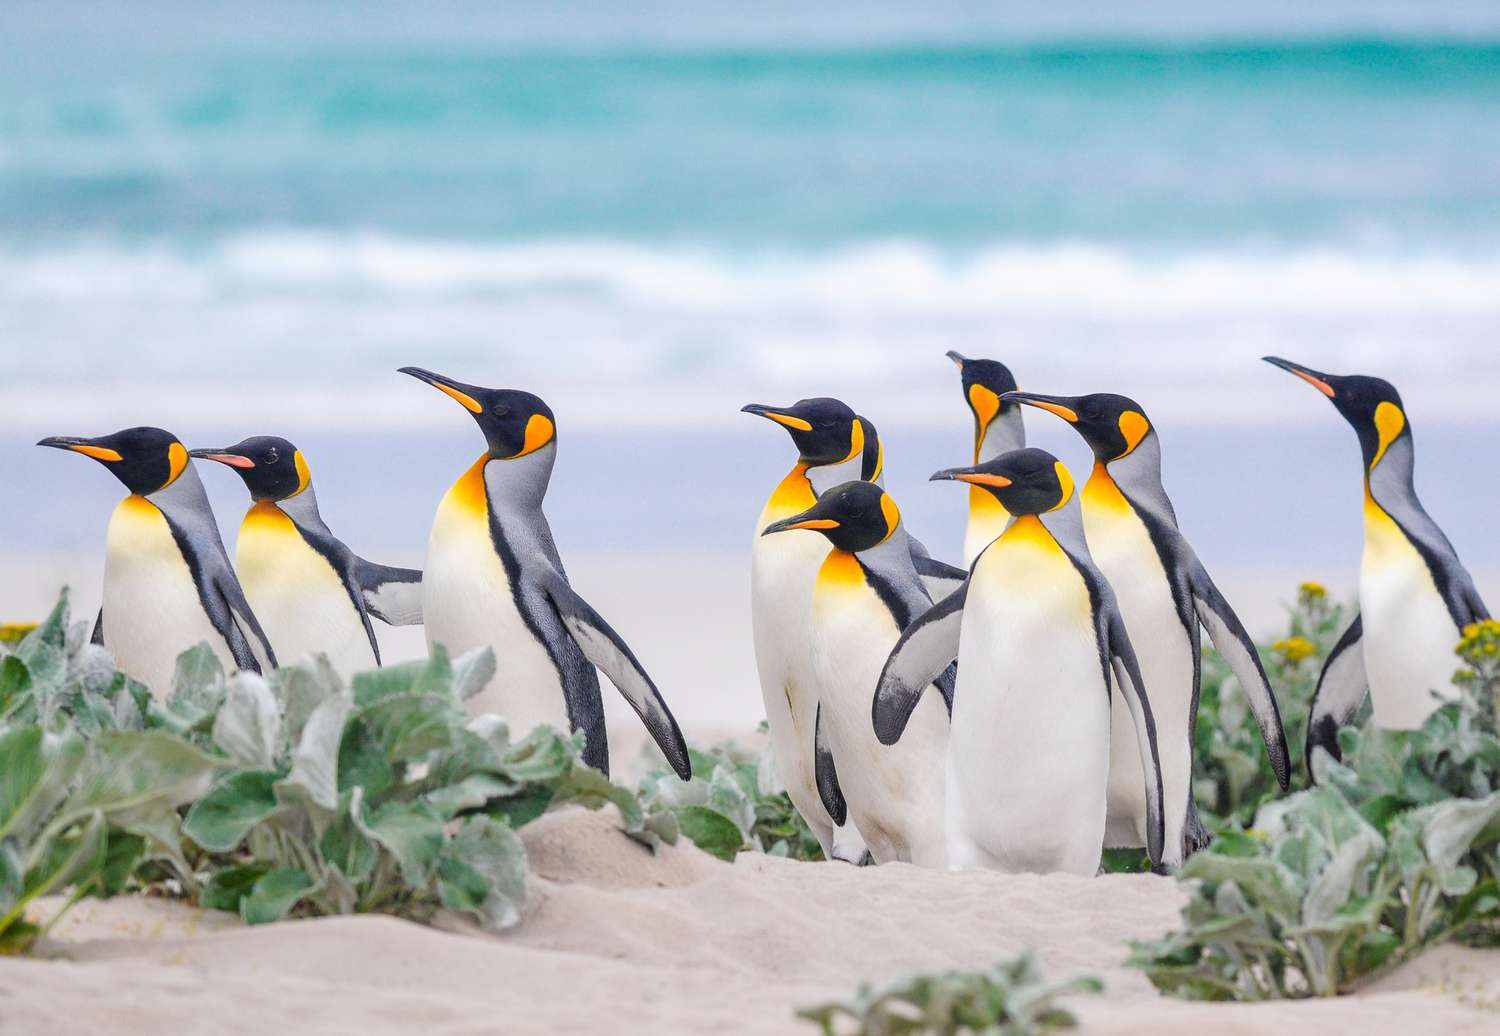 5 Places Where Penguins Live (& Best Times to See Them There)